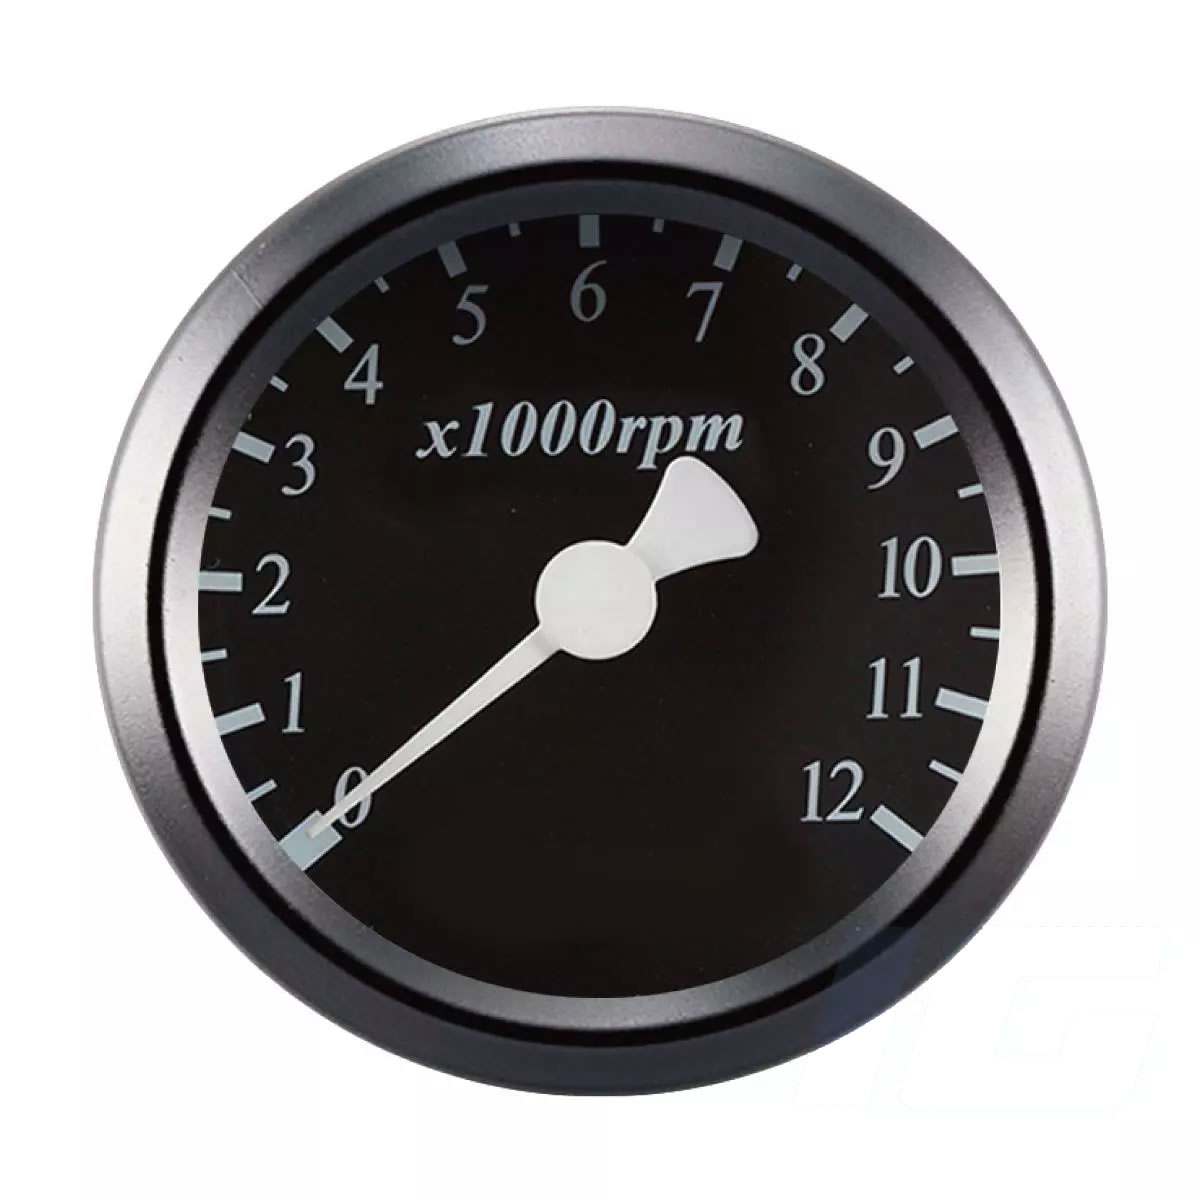 48mm White Face Universal Aftermarket Gauge Mechanical Tachometer for Motorcycle